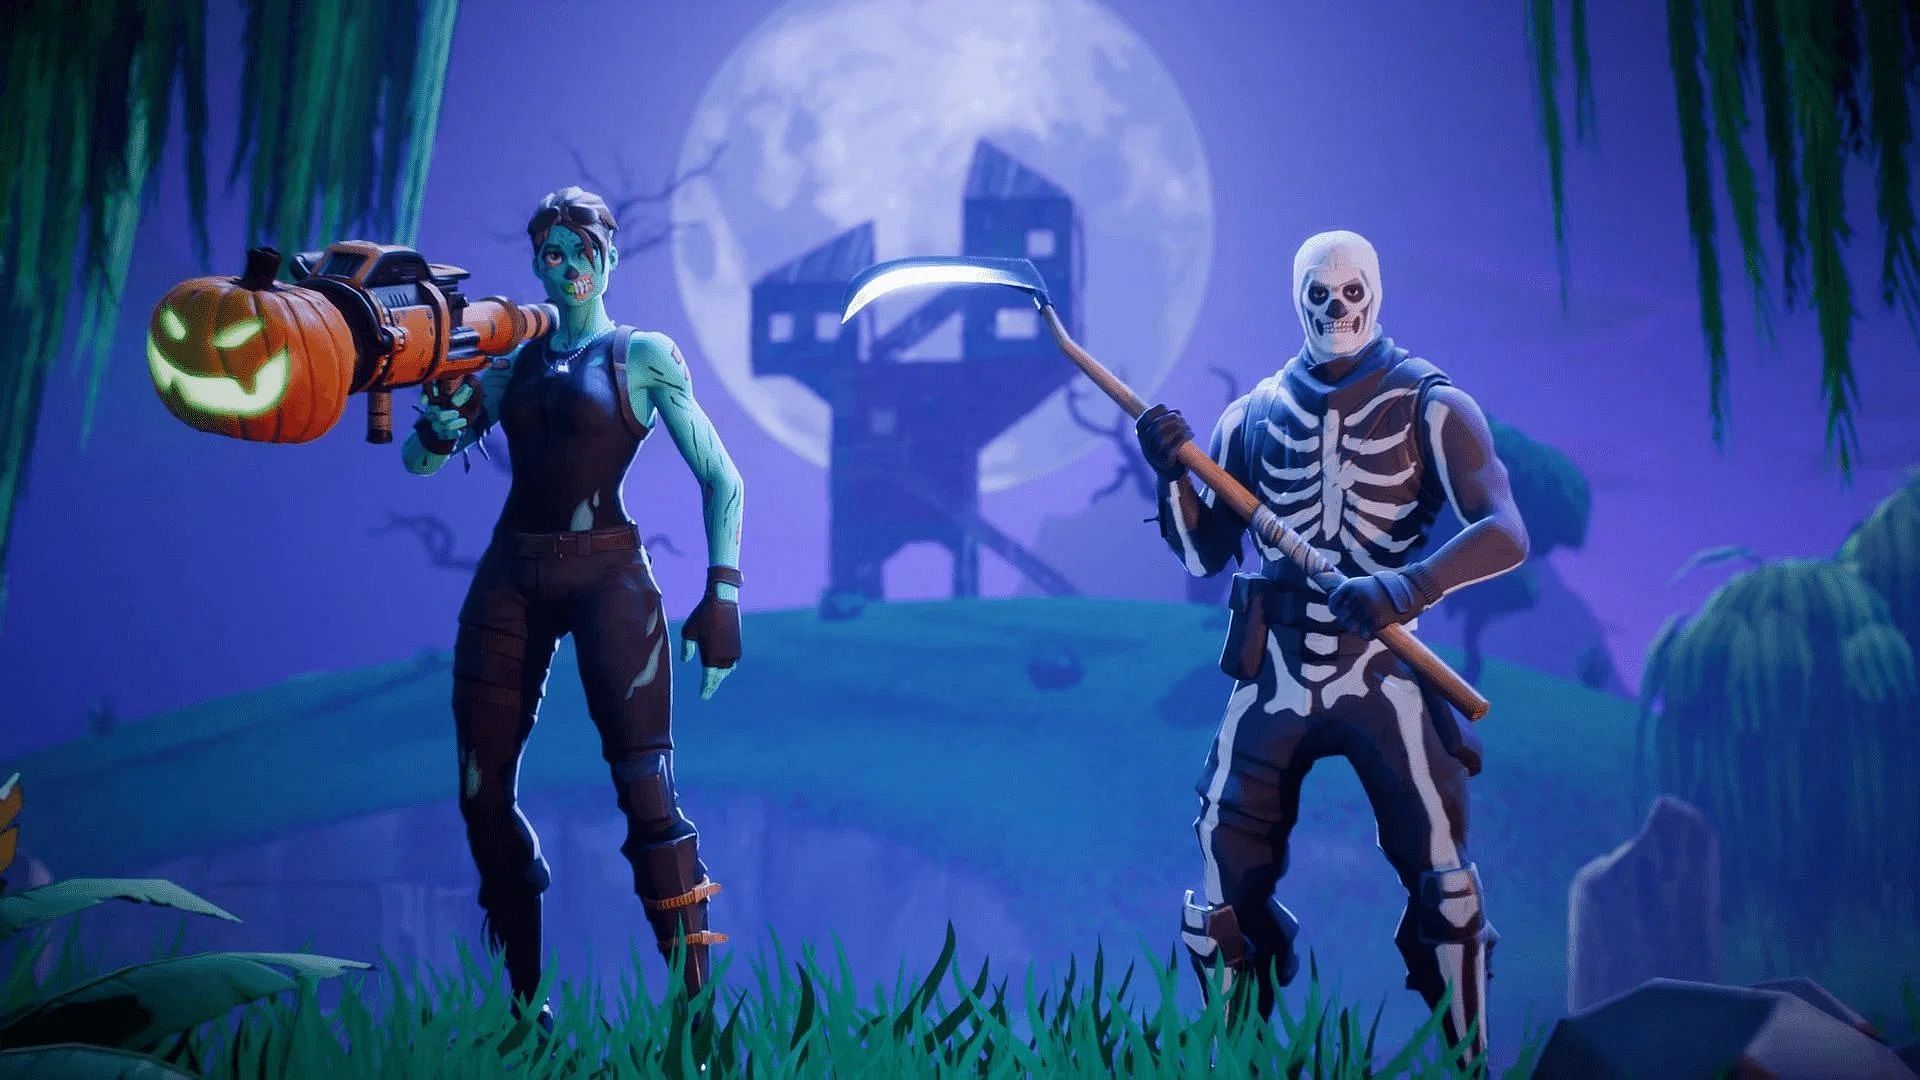 The Fortnitemares 2022 update will most likely bring back the Pumpkin Launcher (Image via Epic Games)